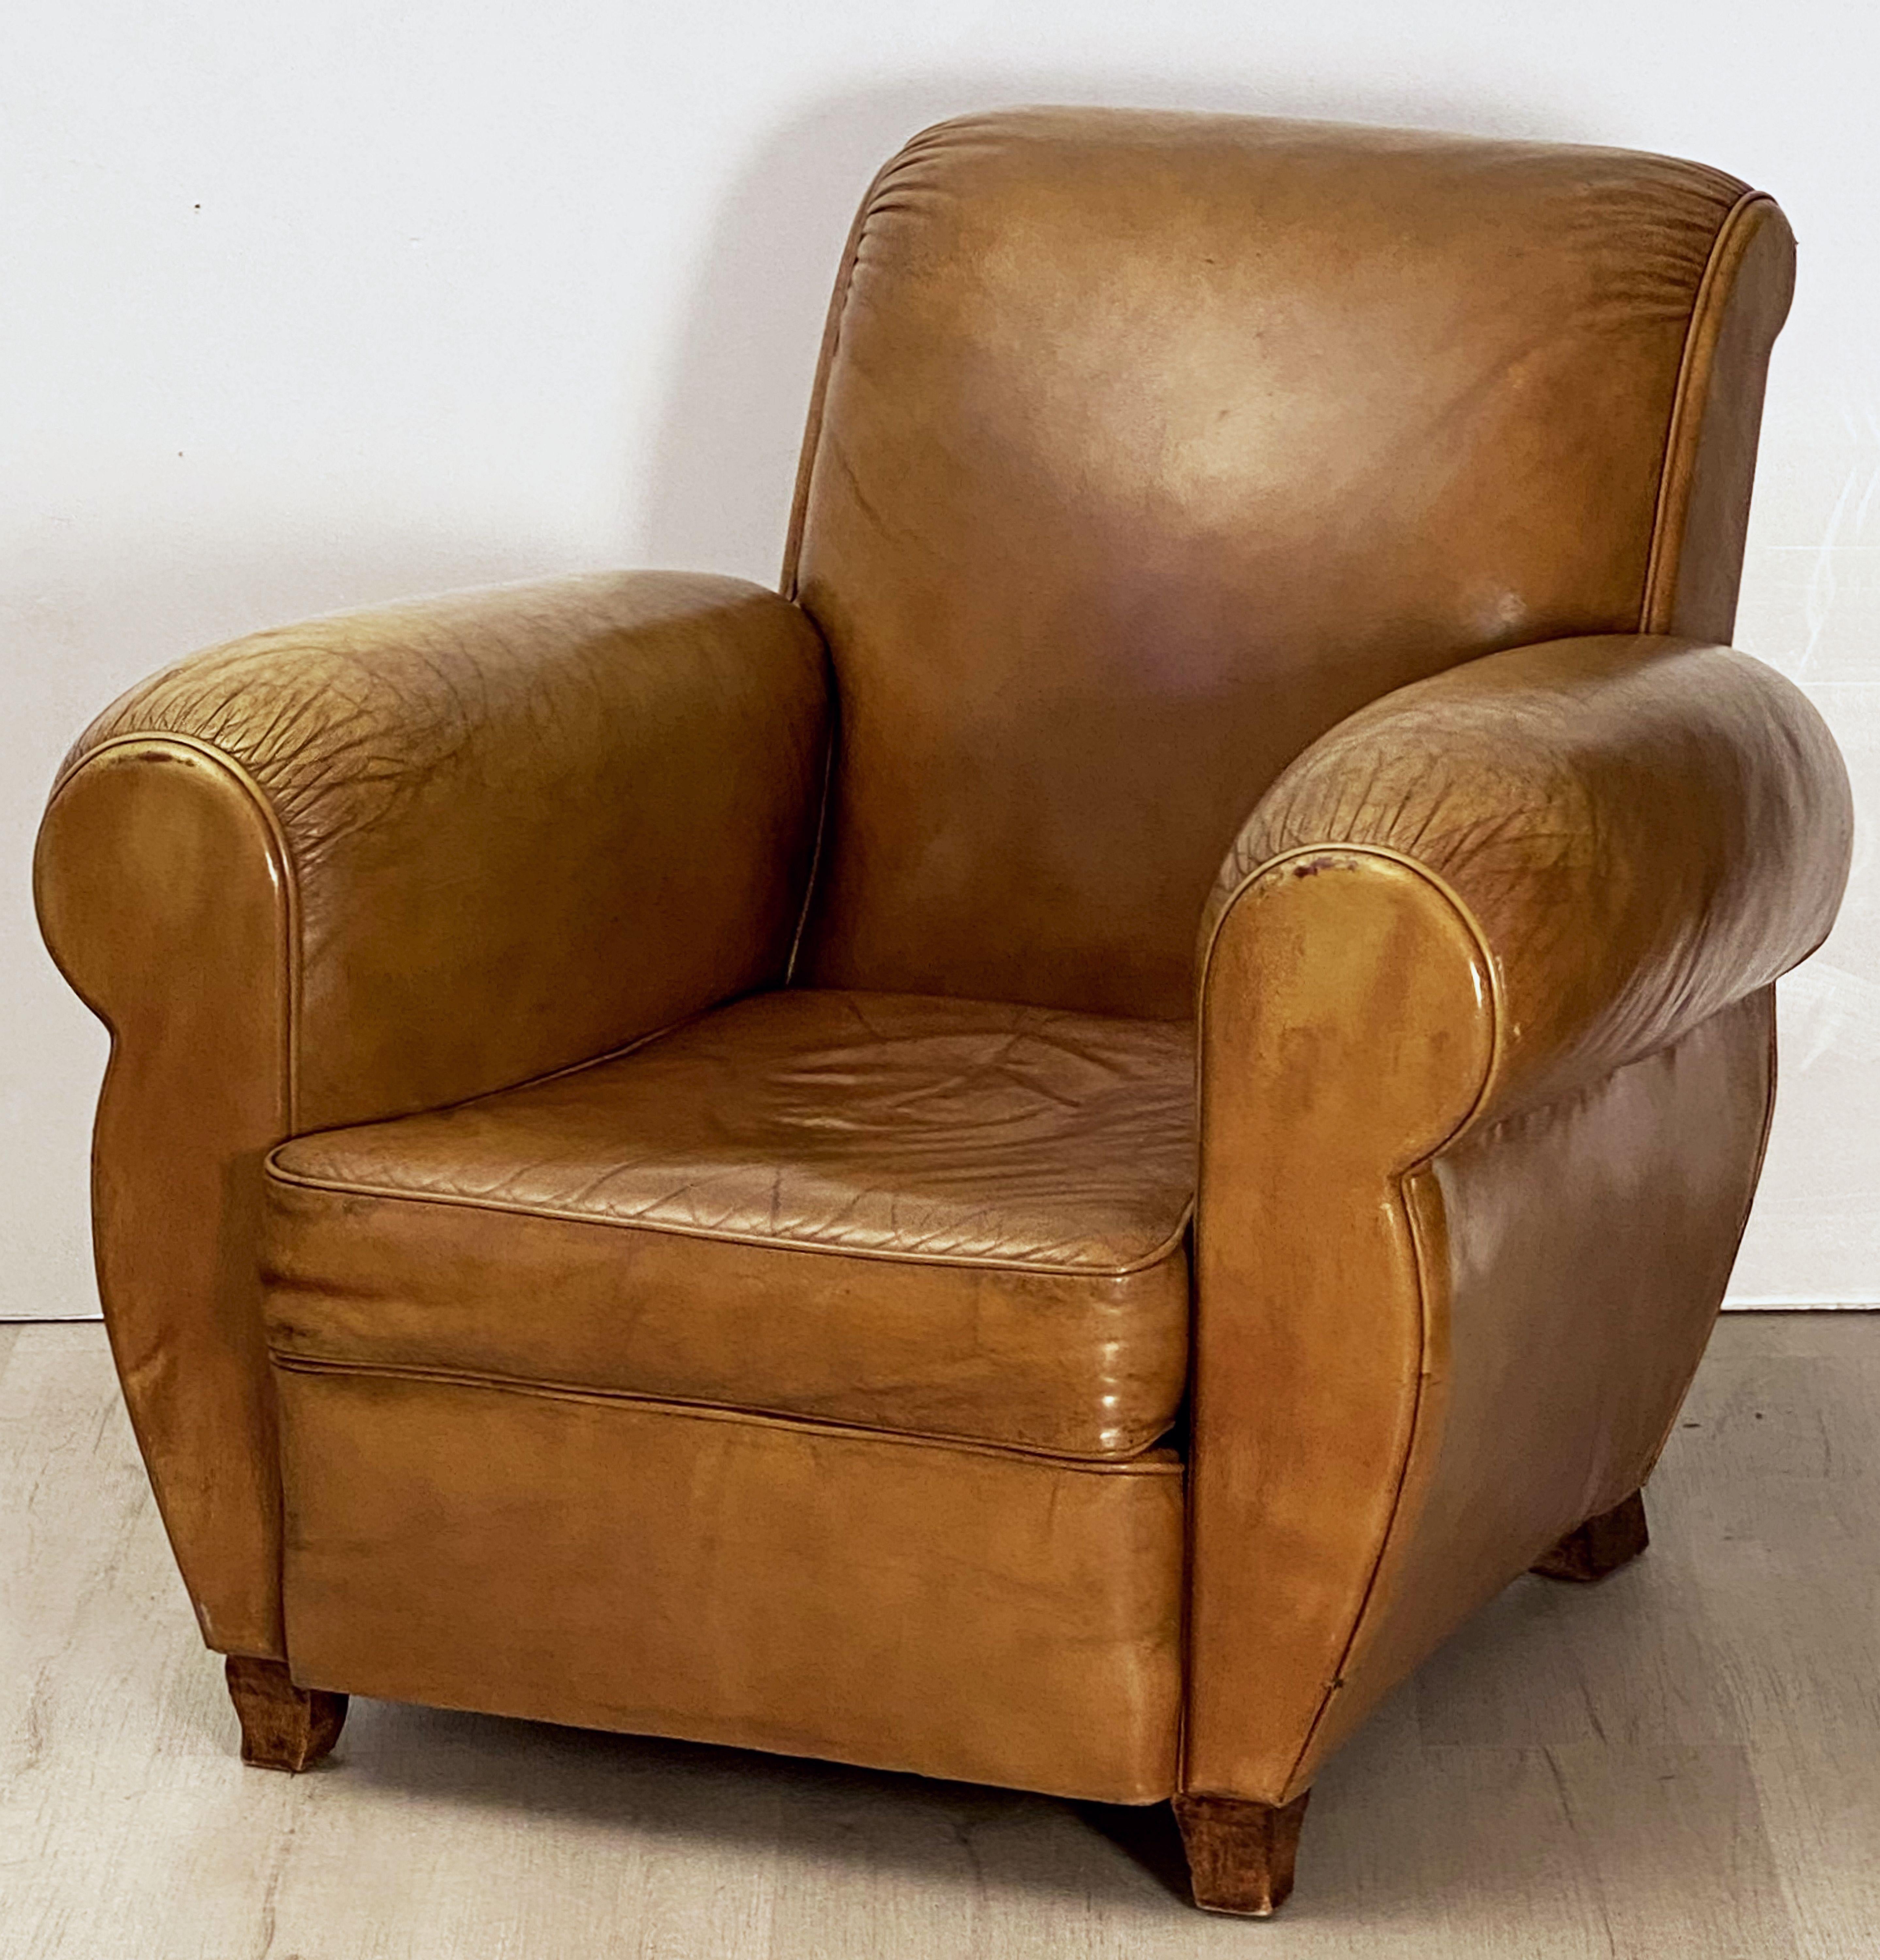 French Art Deco Leather Club Chairs from France 'Priced as a Pair'